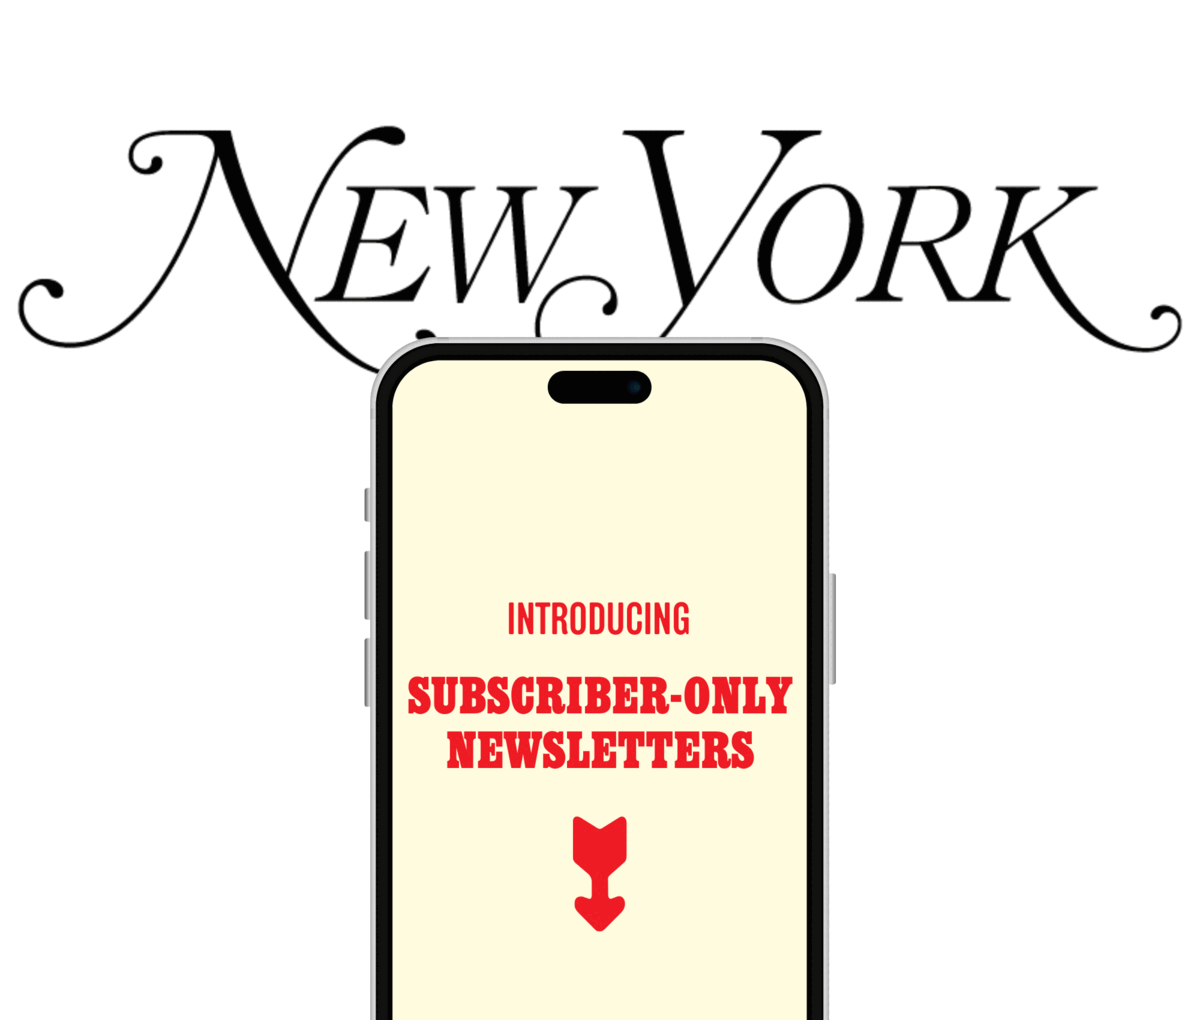 New York: Introducing Subscriber-Only Newsletters 